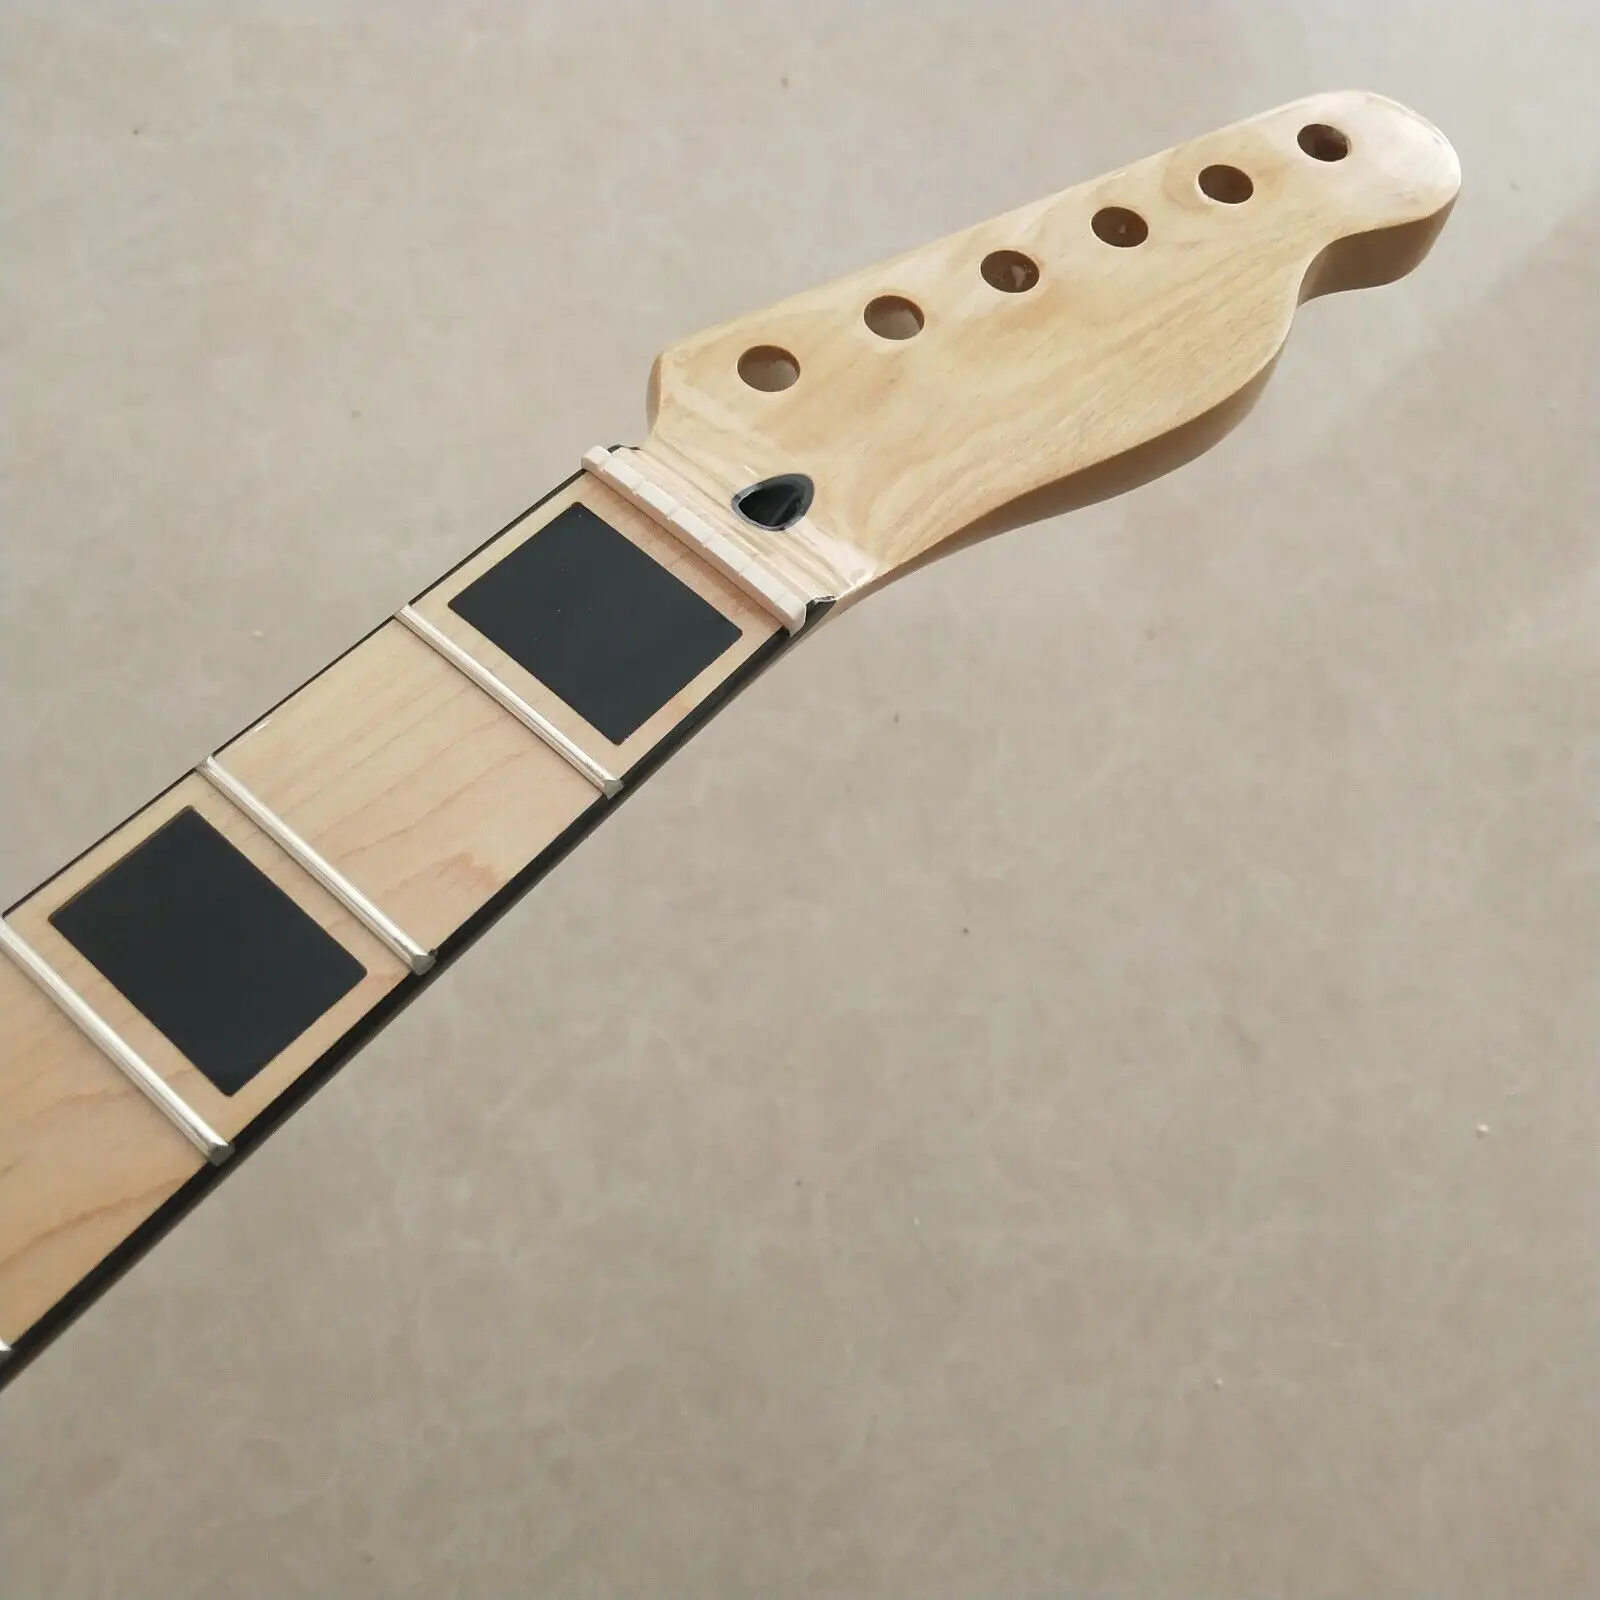 High quality Maple Guitar neck 22 fret 25.5in Maple Fretboard Black Block Inlay